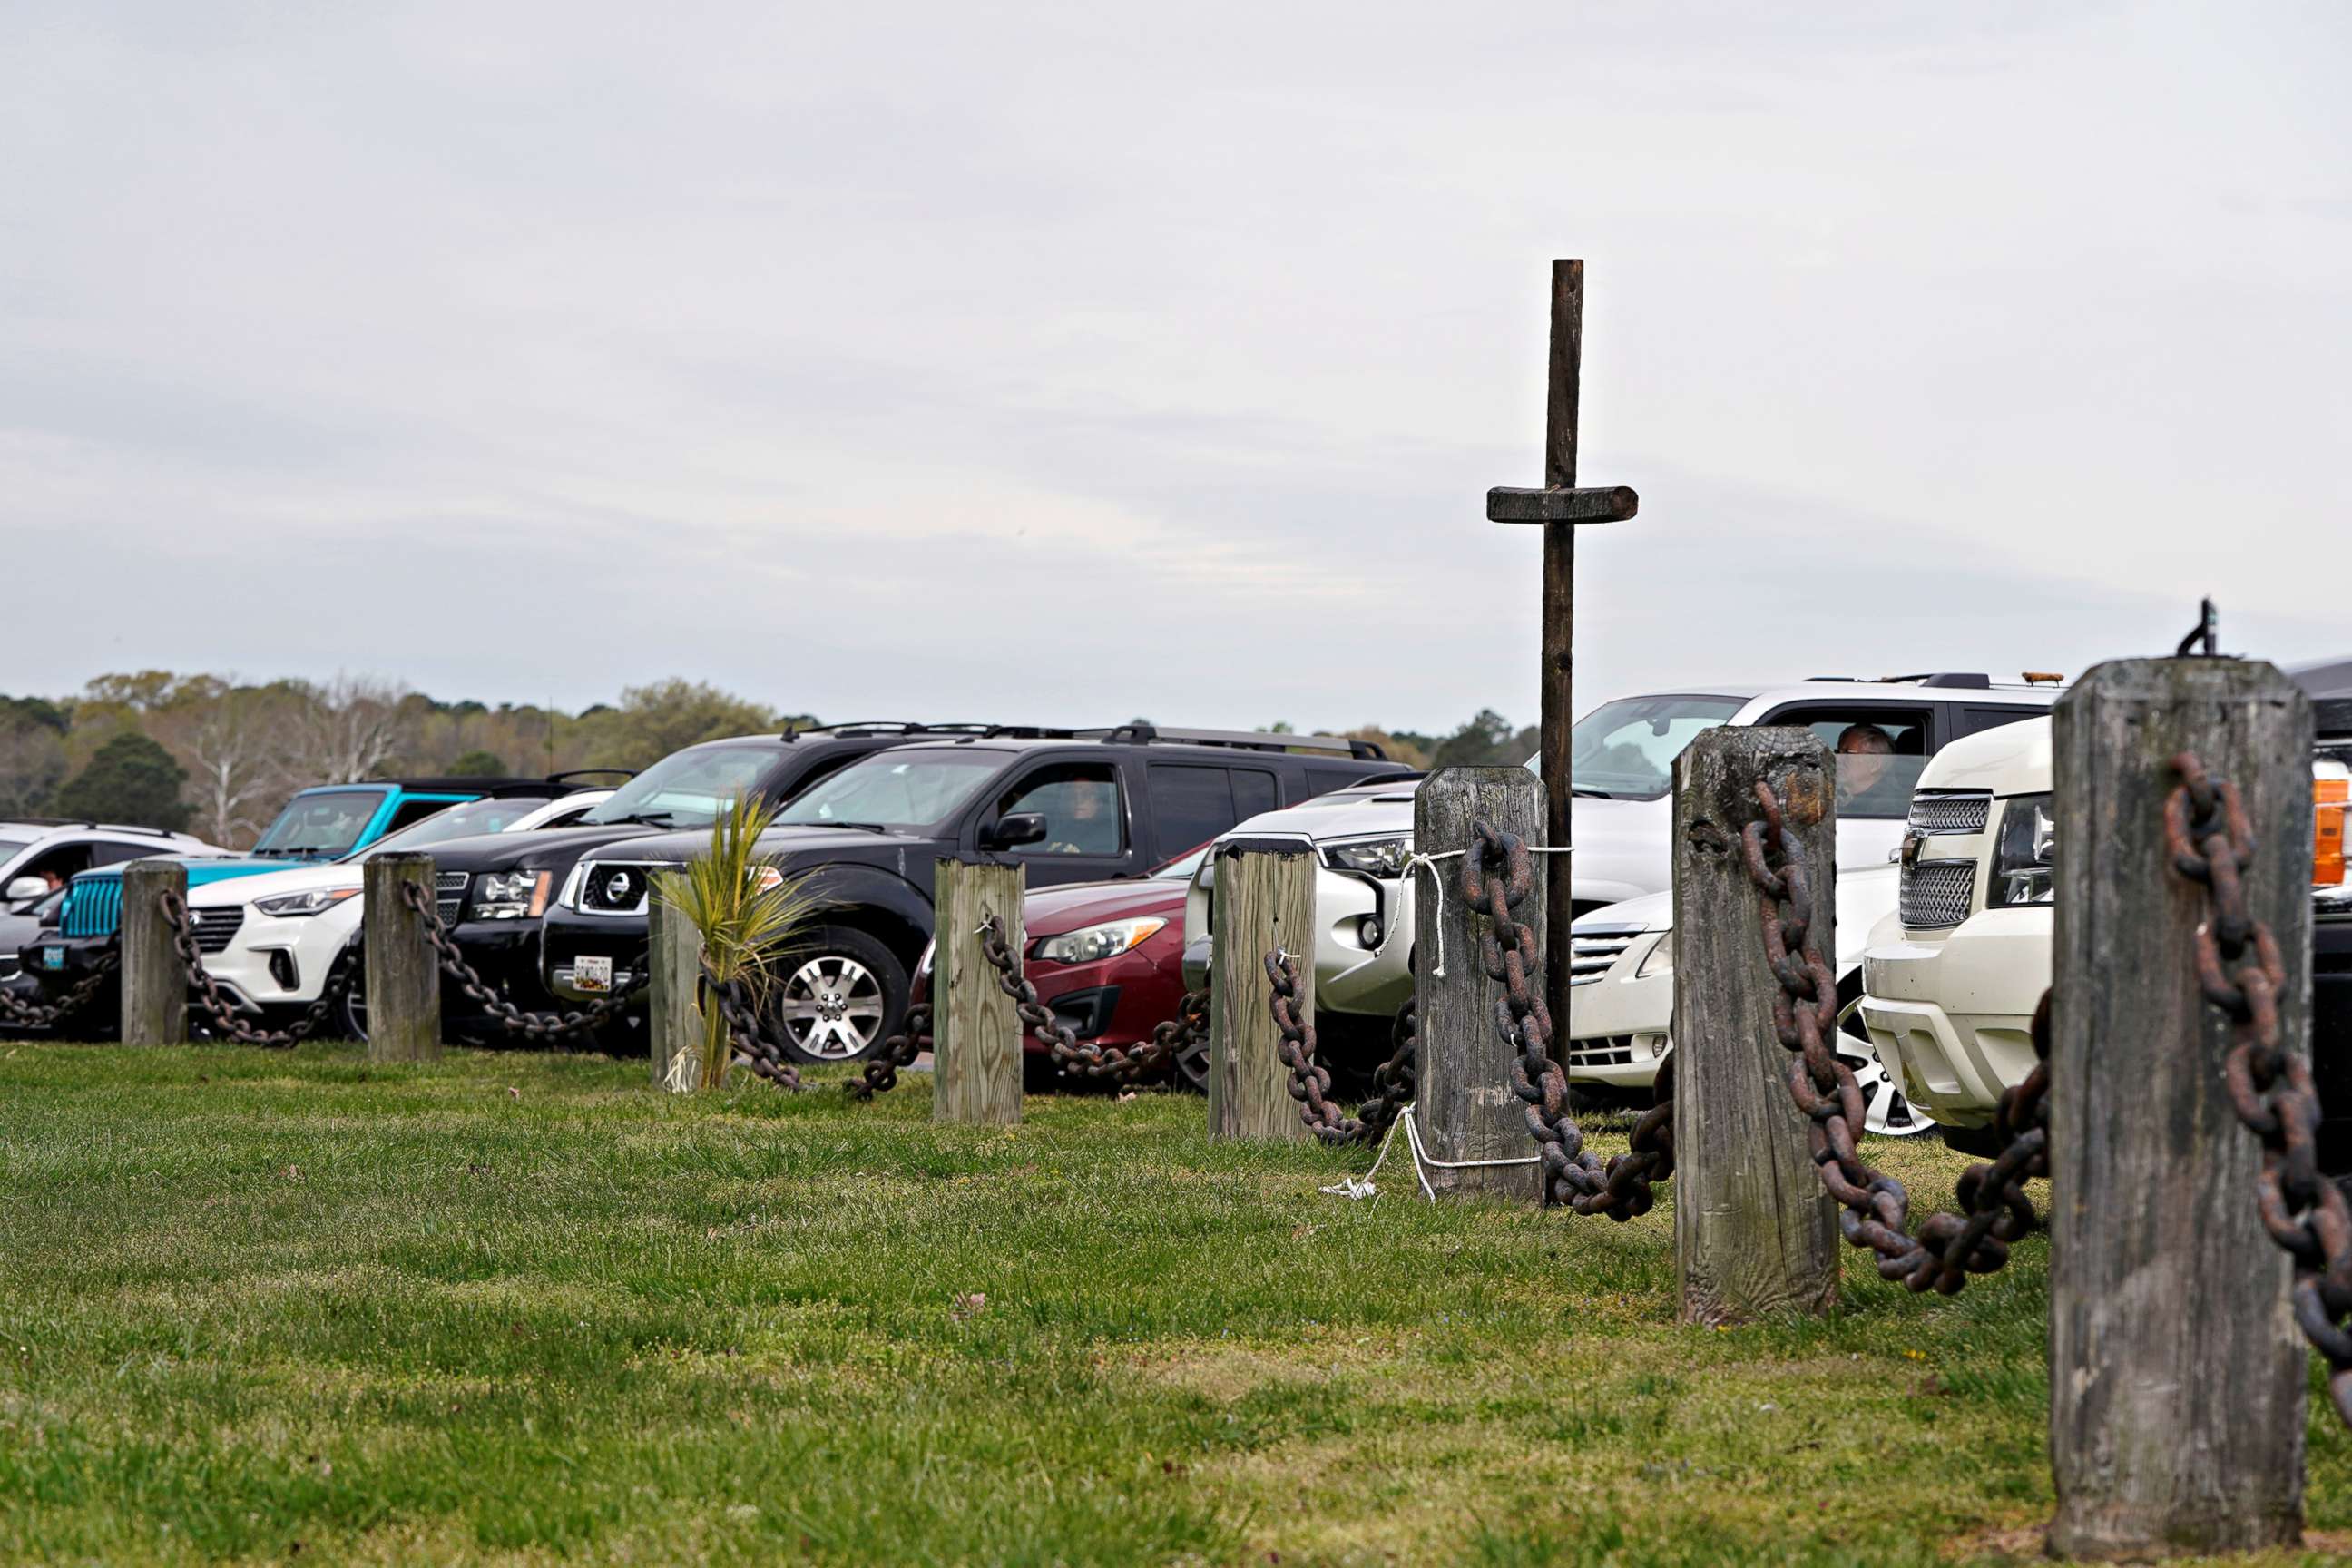 PHOTO: Congregants pray in their vehicles as they attend Easter Sunday drive-in church services as part of social distancing practices during the outbreak of coronavirus disease (COVID-19) in Cambridge, Maryland, April 12, 2020.